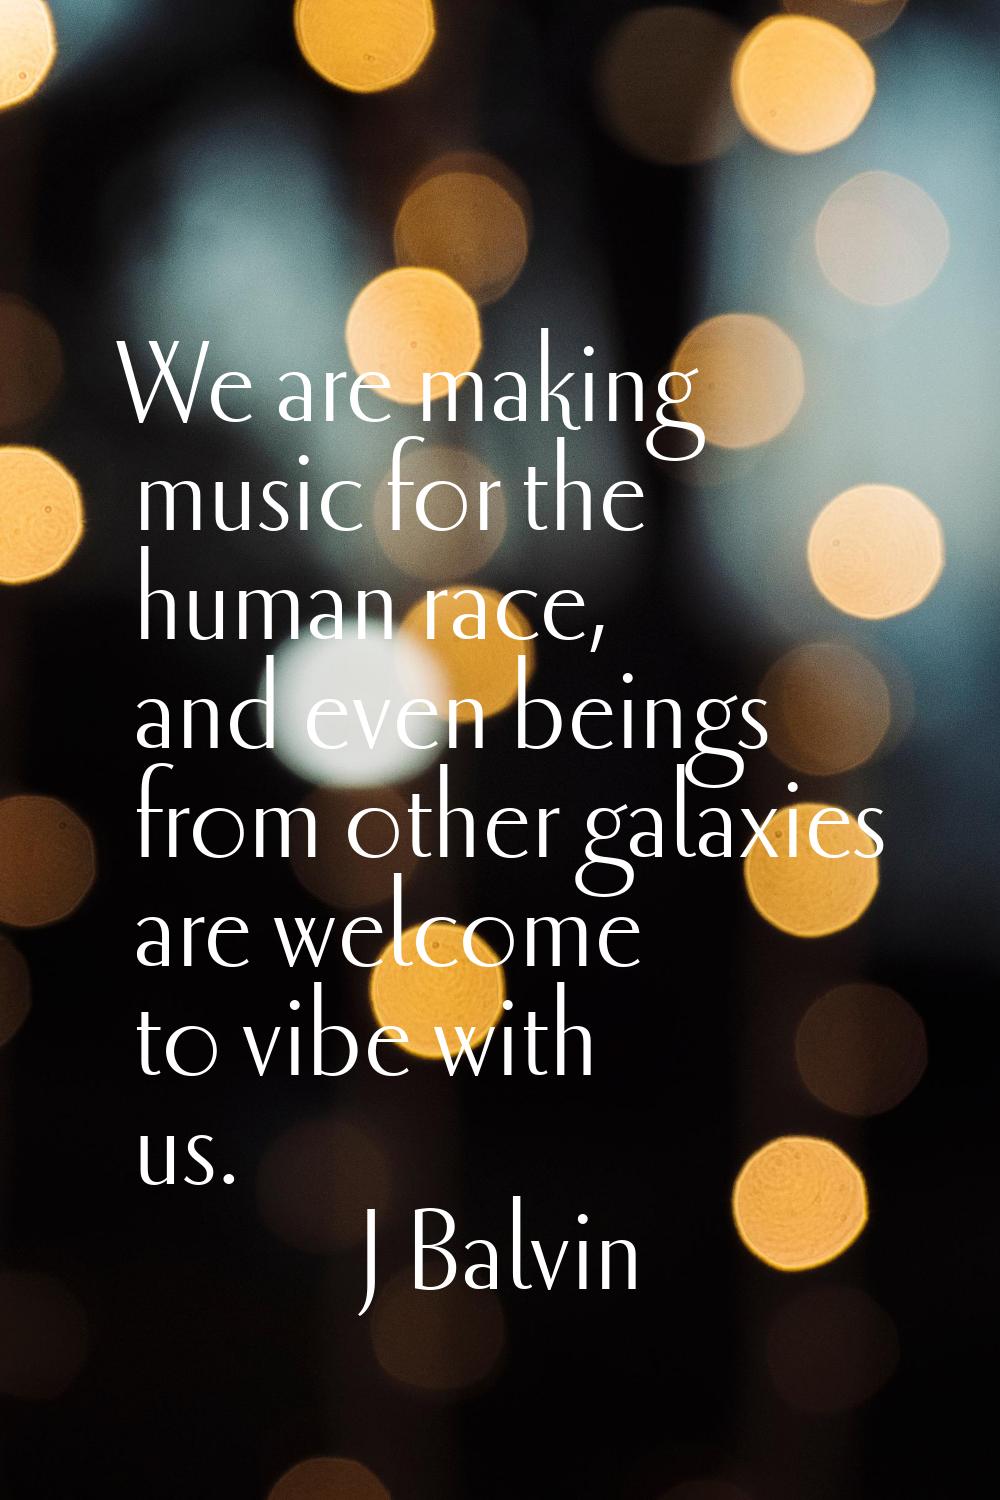 We are making music for the human race, and even beings from other galaxies are welcome to vibe wit